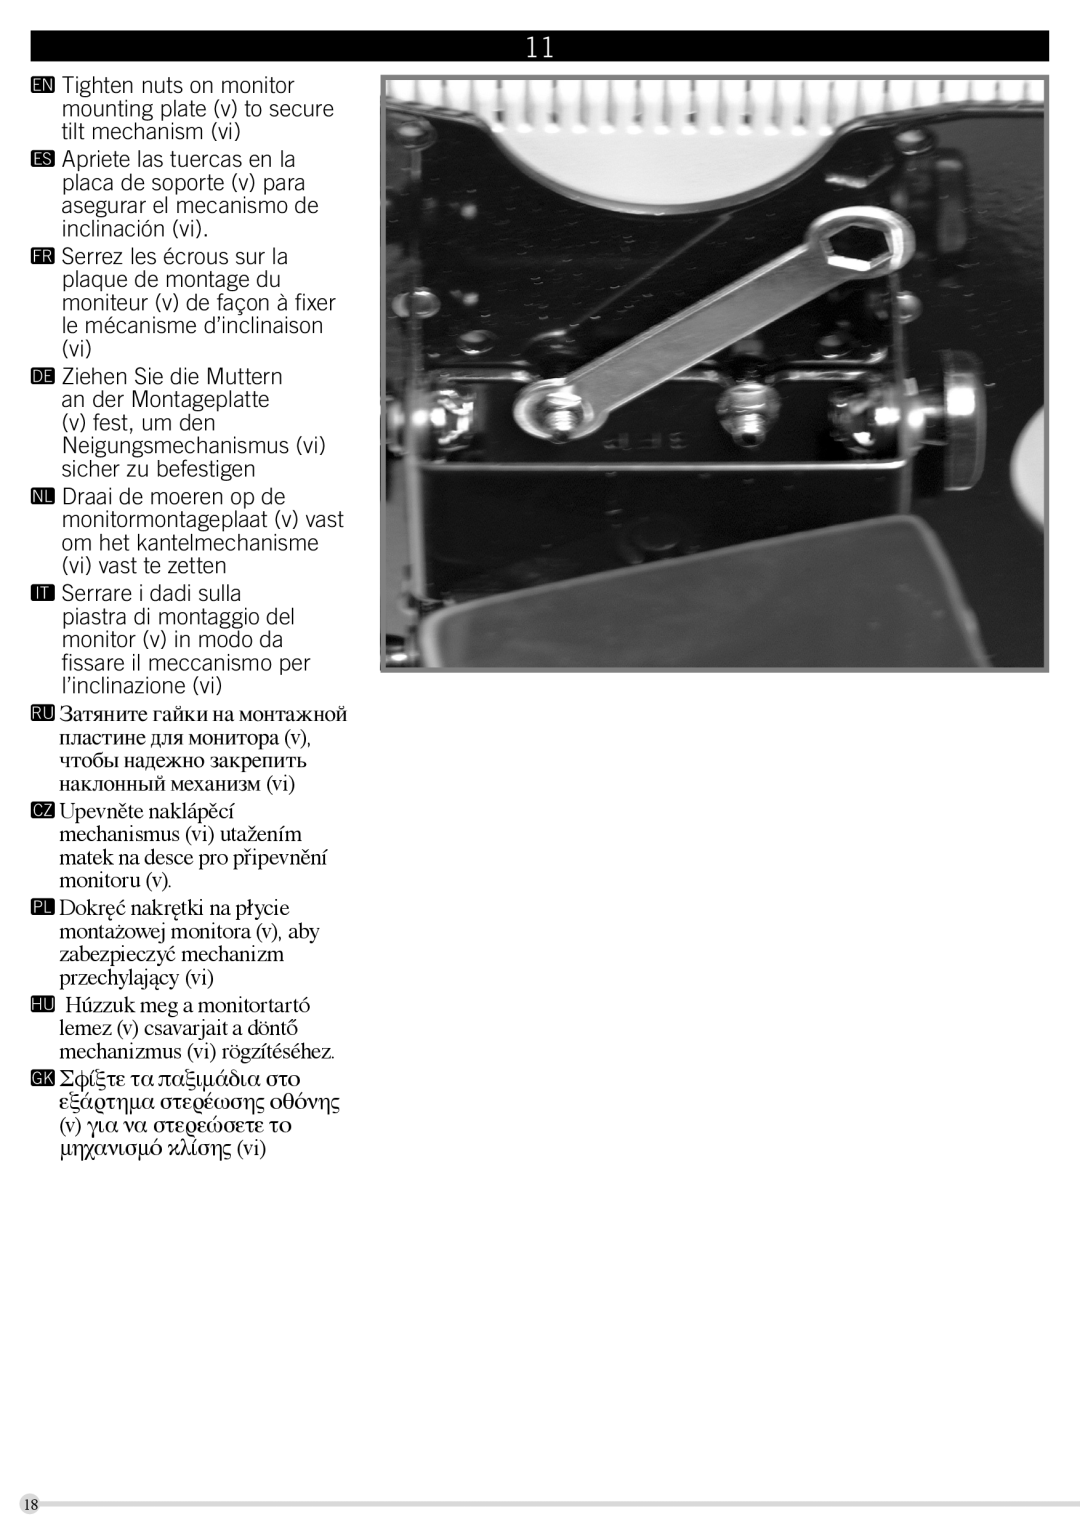 Omnimount G303FP instruction manual Tighten nuts on monitor mounting plate v to secure tilt mechanism 